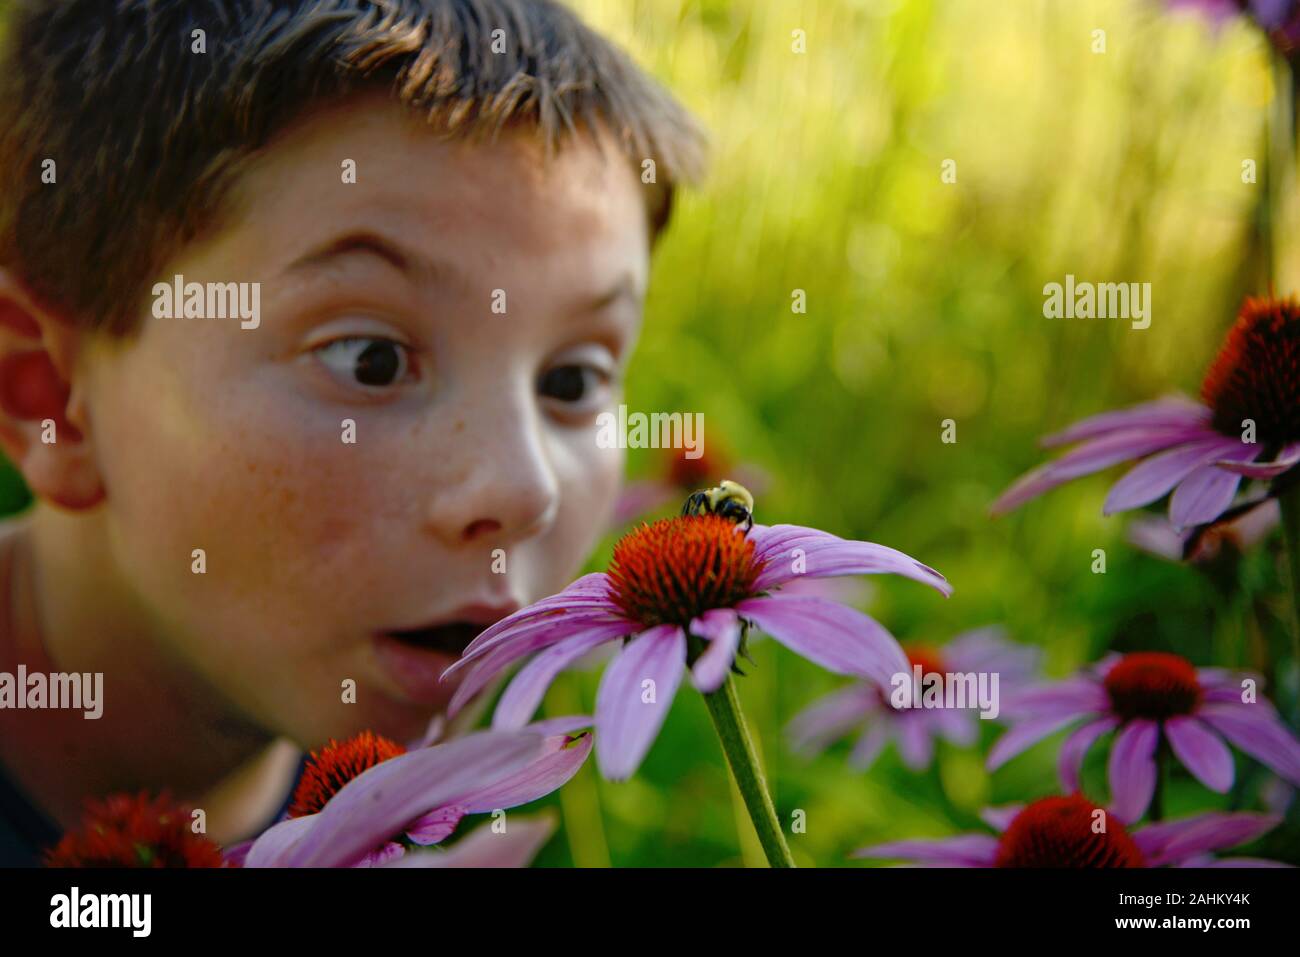 Young and curious boy checks out a bumblebee pollinating a purple Coneflower in the Summertime Stock Photo